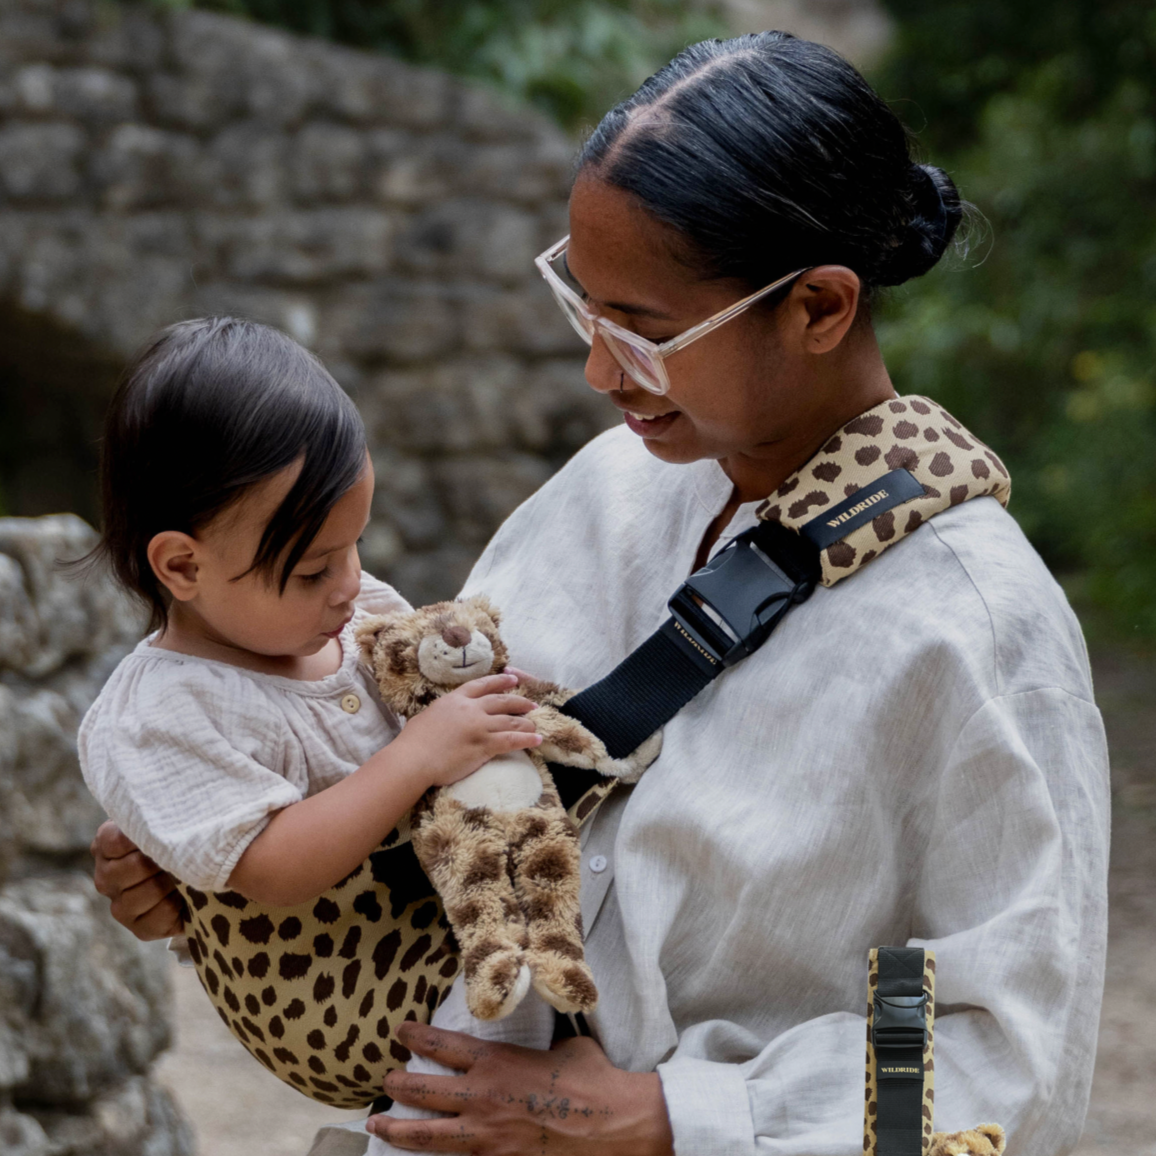 The Cheetah toddler carrier